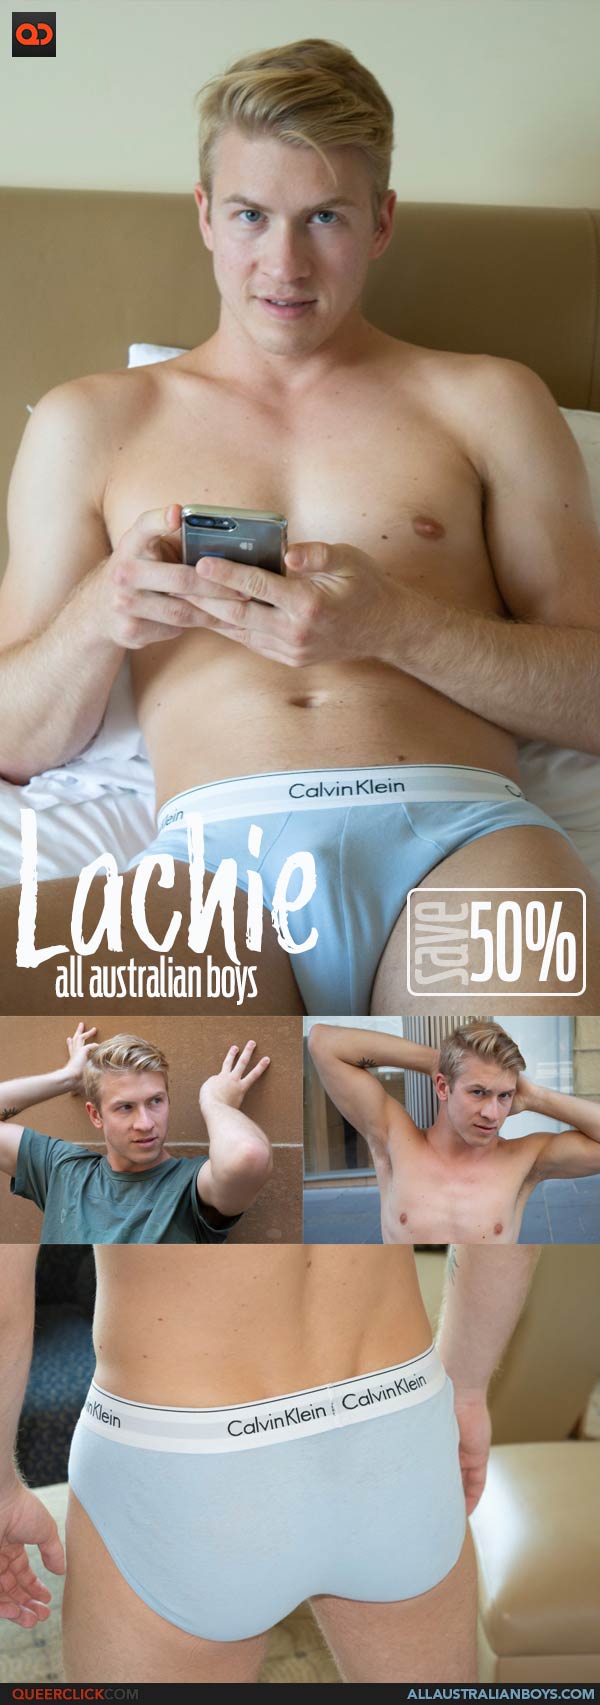 AllAustralianBoys: Lachie - EXCLUSIVE OFFER SAVE 50%